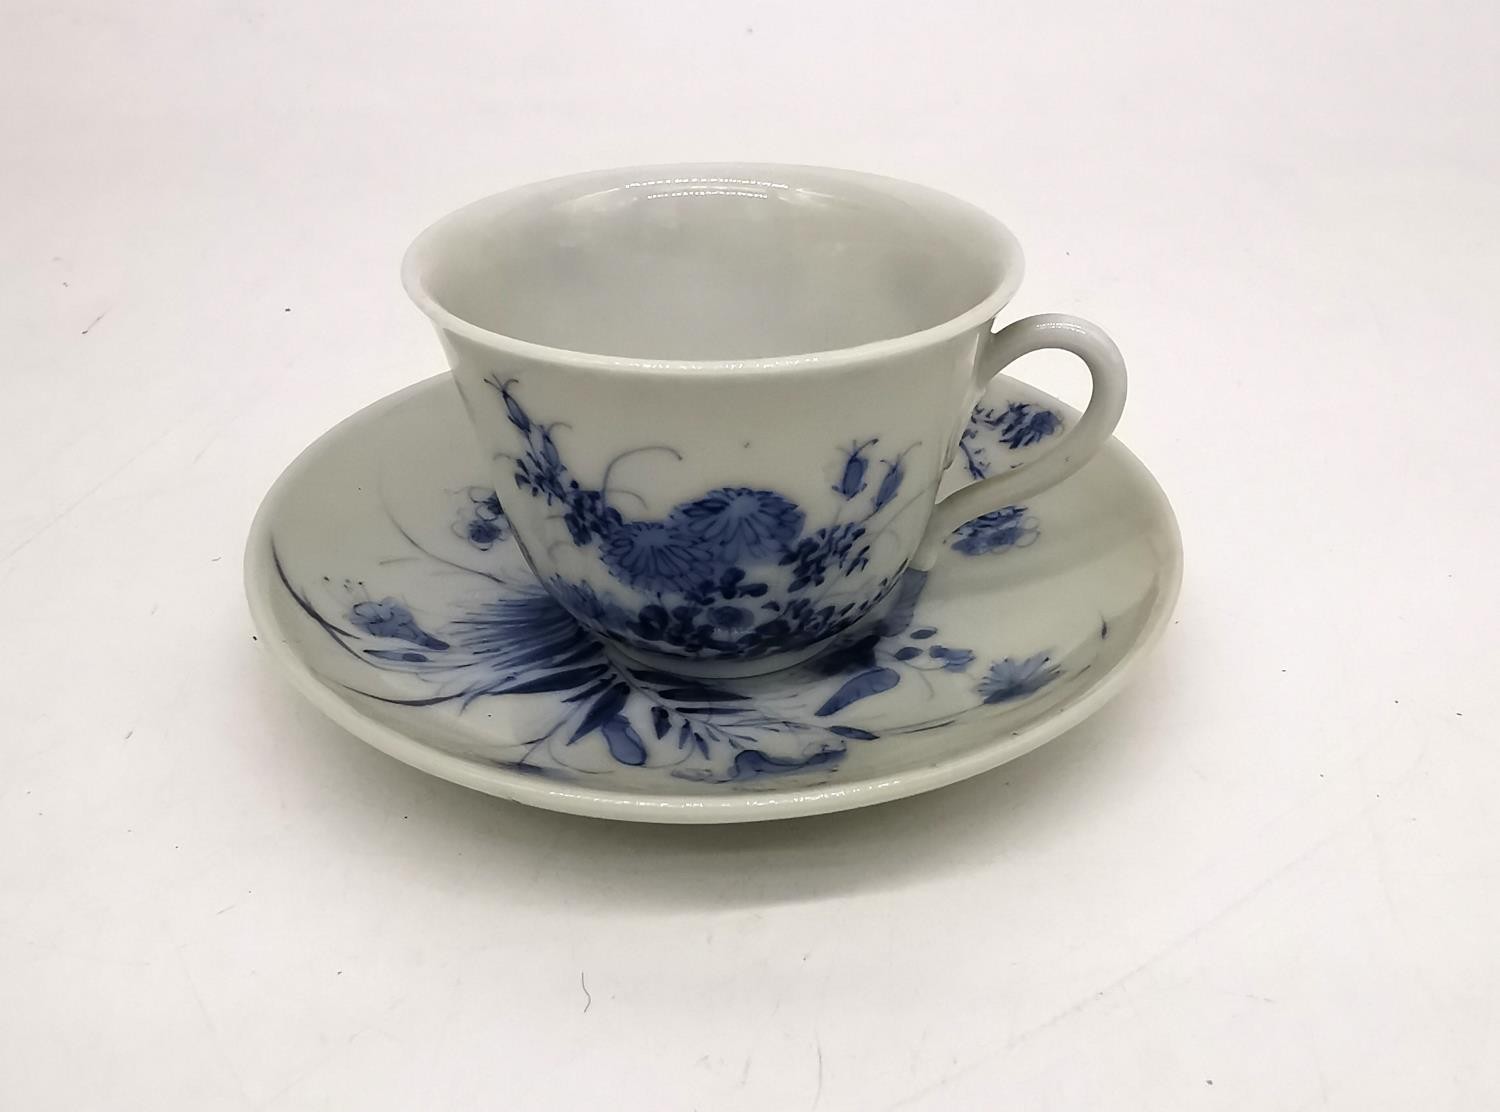 A Japanese 19th century hand painted porcelain small blue and white floral and foliate design teacup